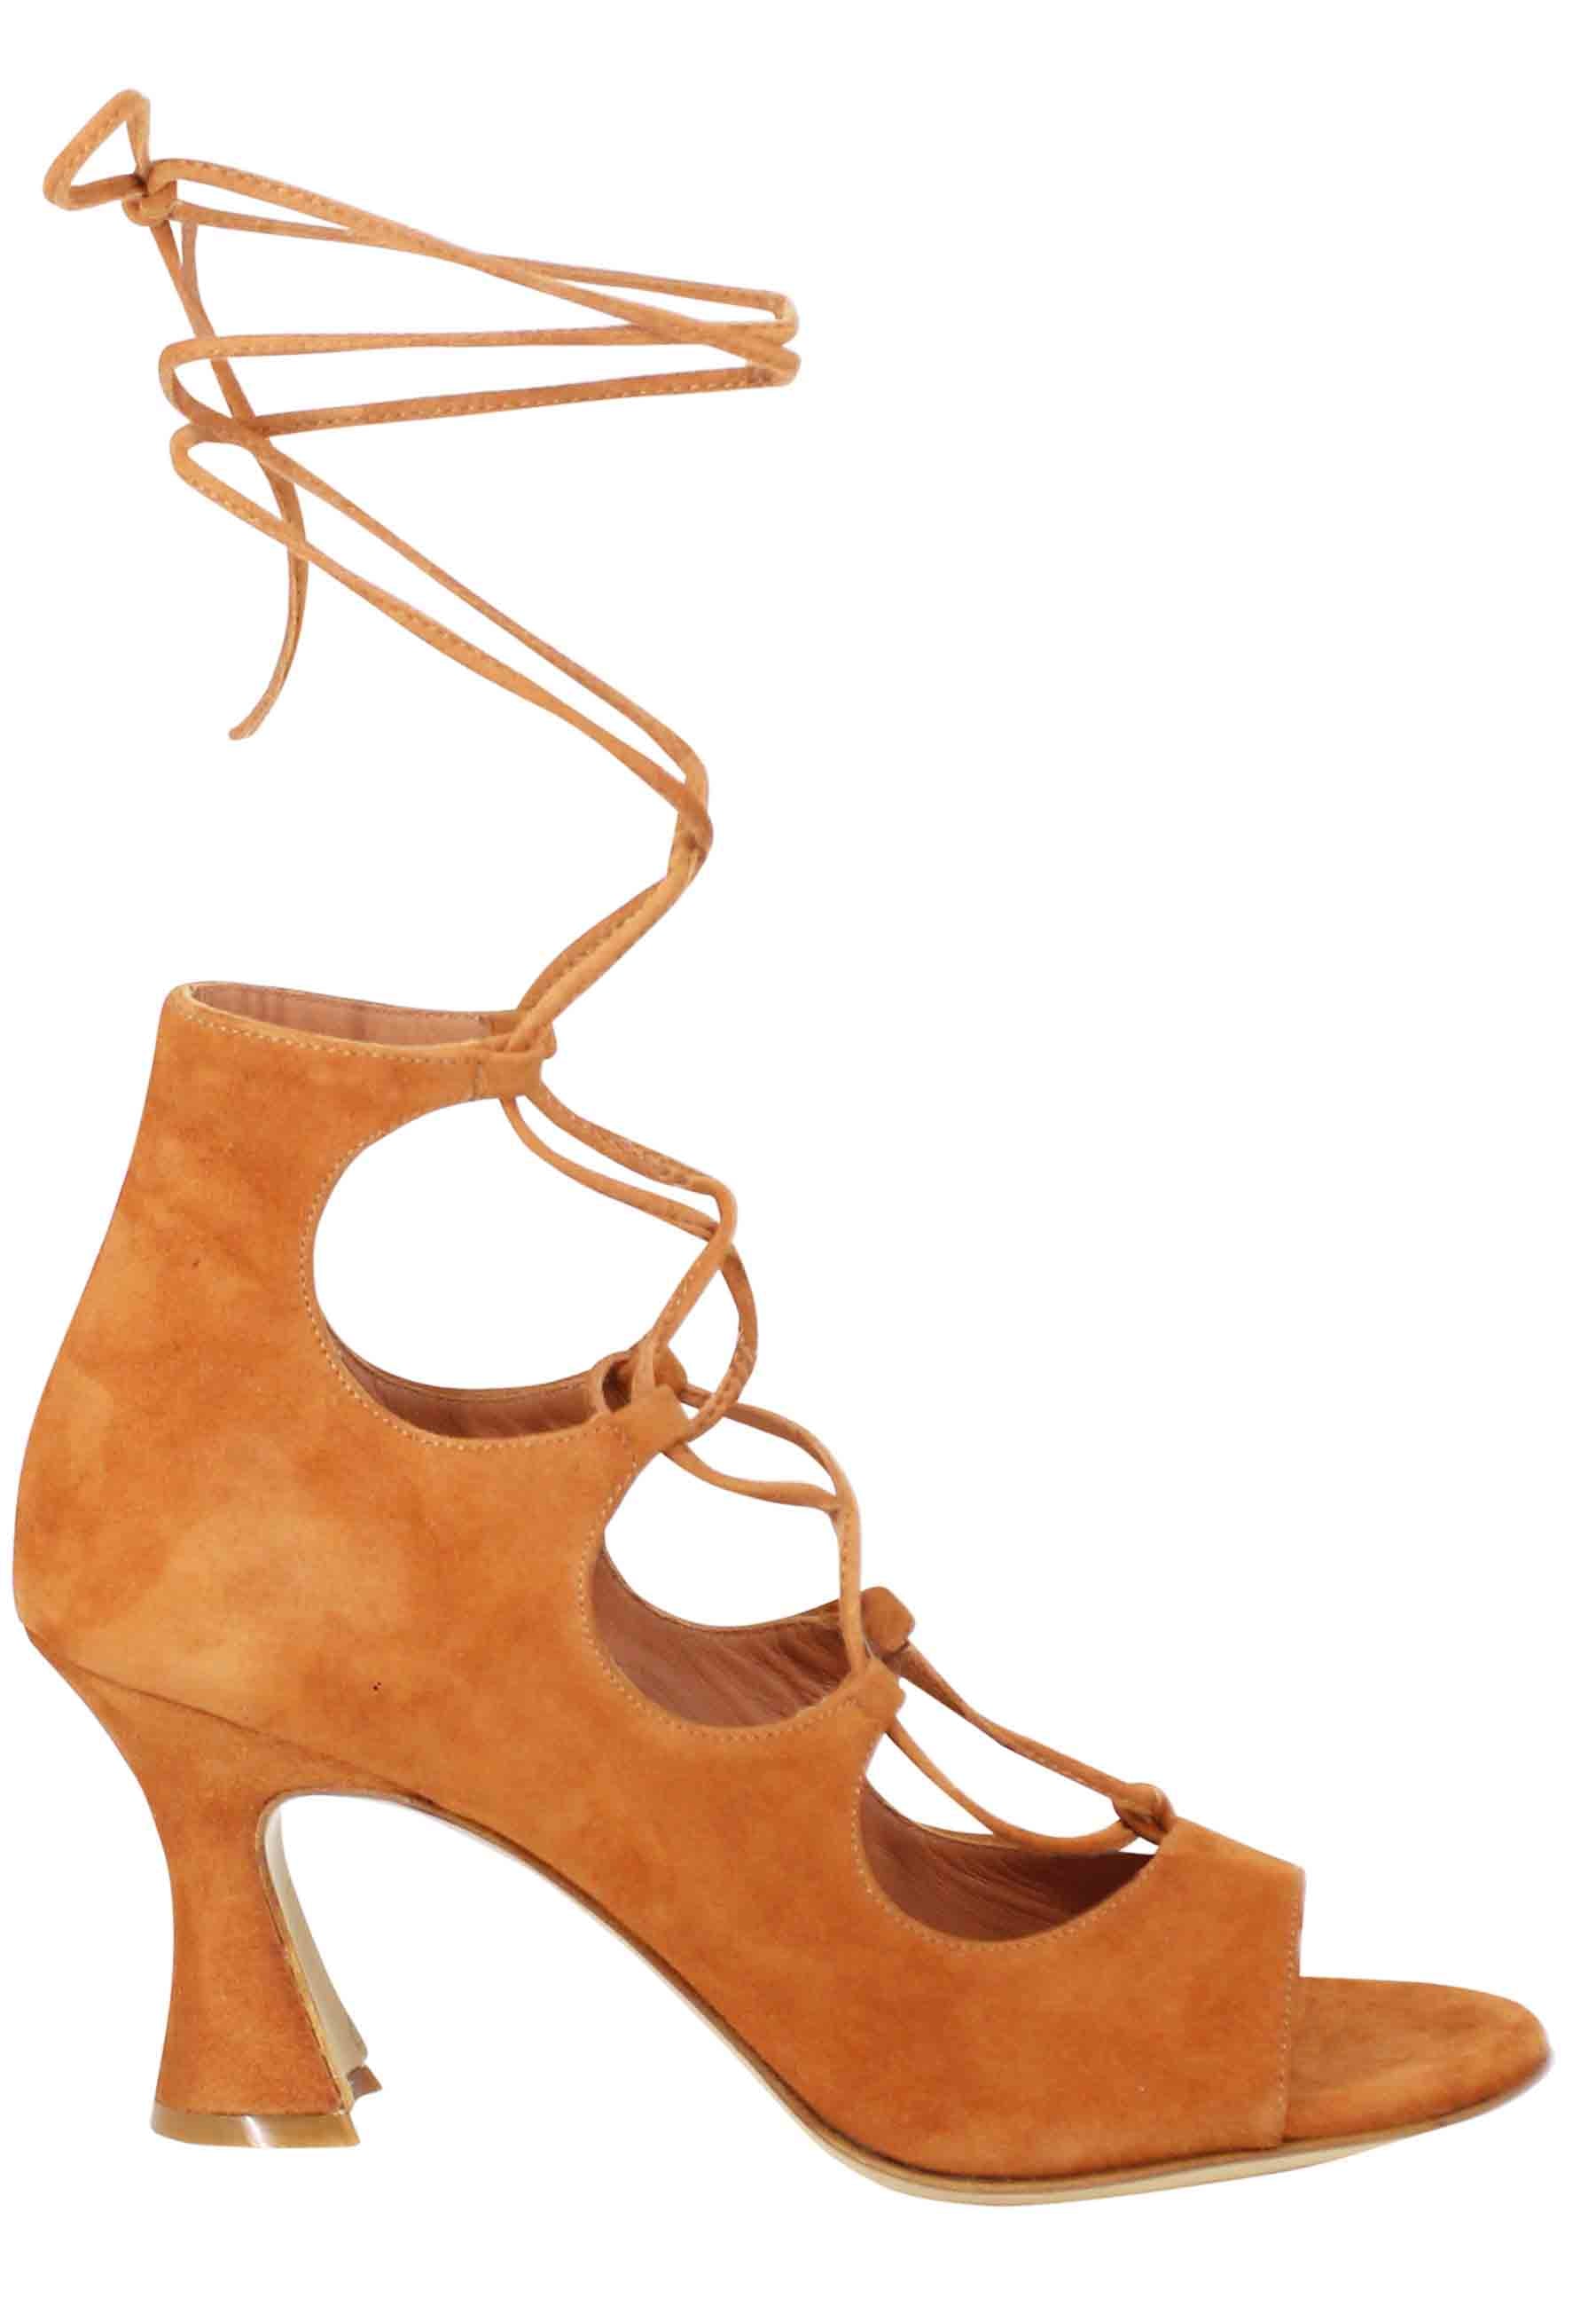 Women's sandals in leather suede with ankle laces and closed heel